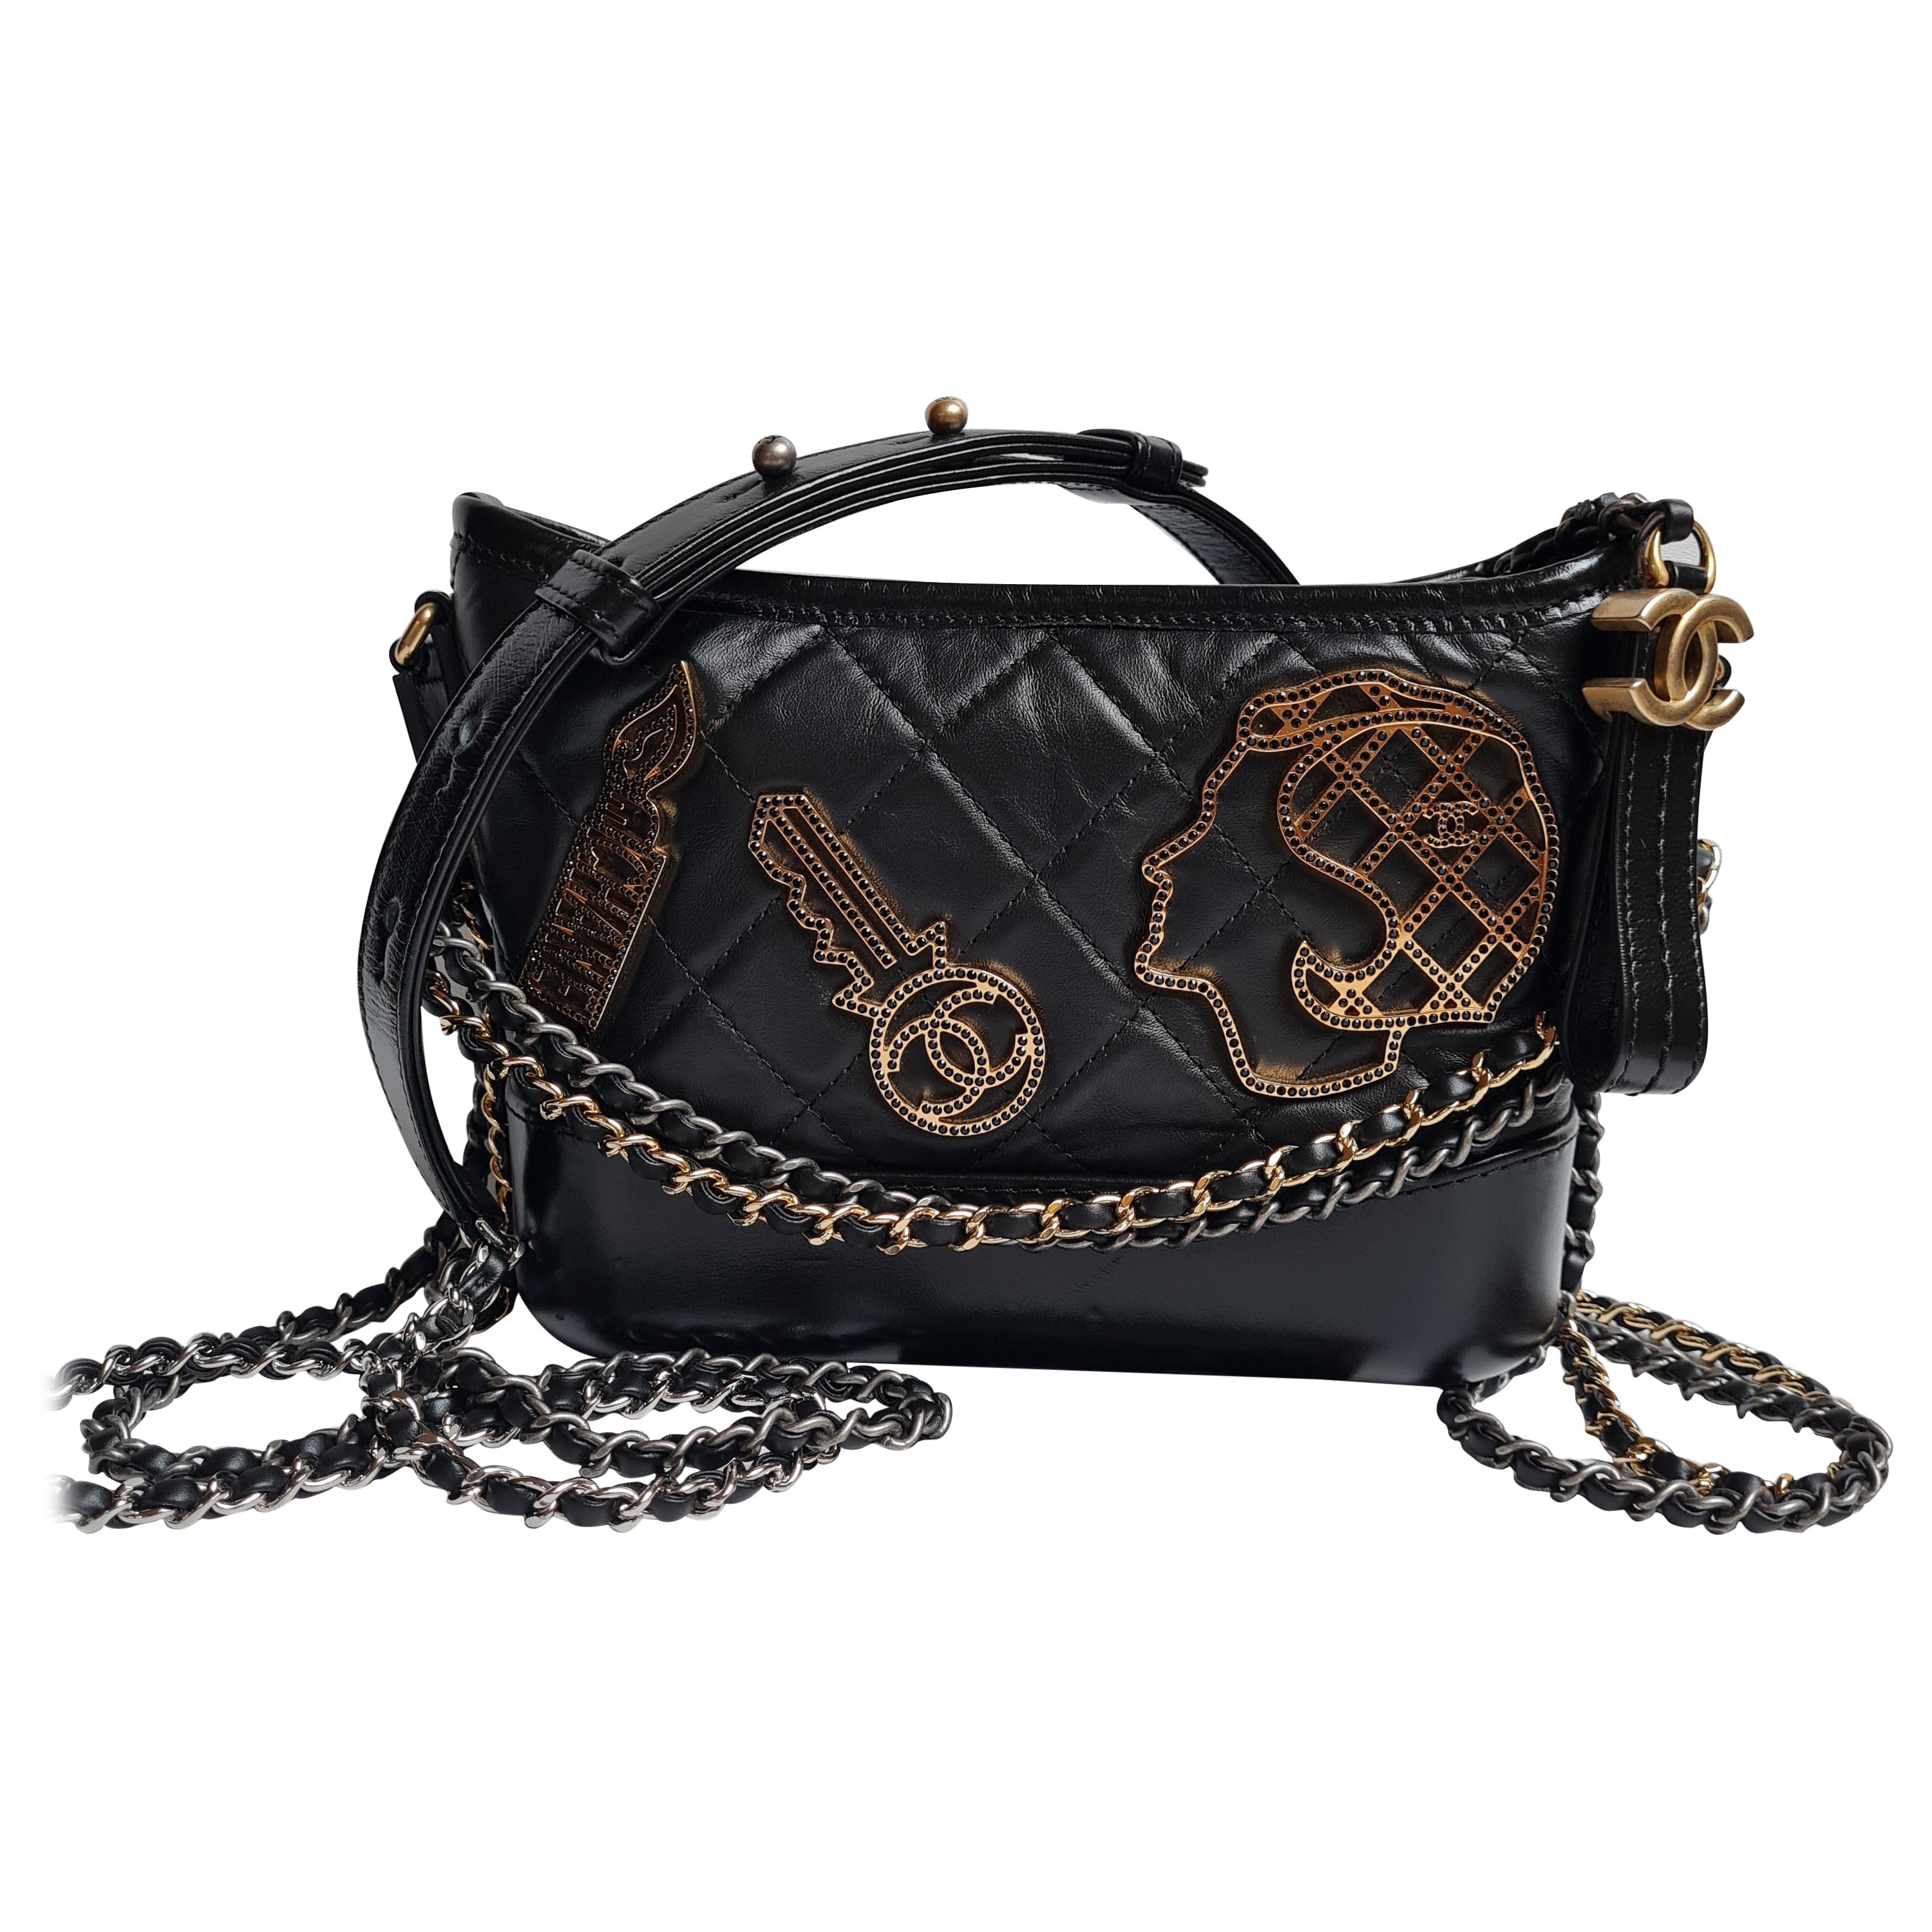 How do you wear a Chanel Gabrielle bag? - Questions & Answers